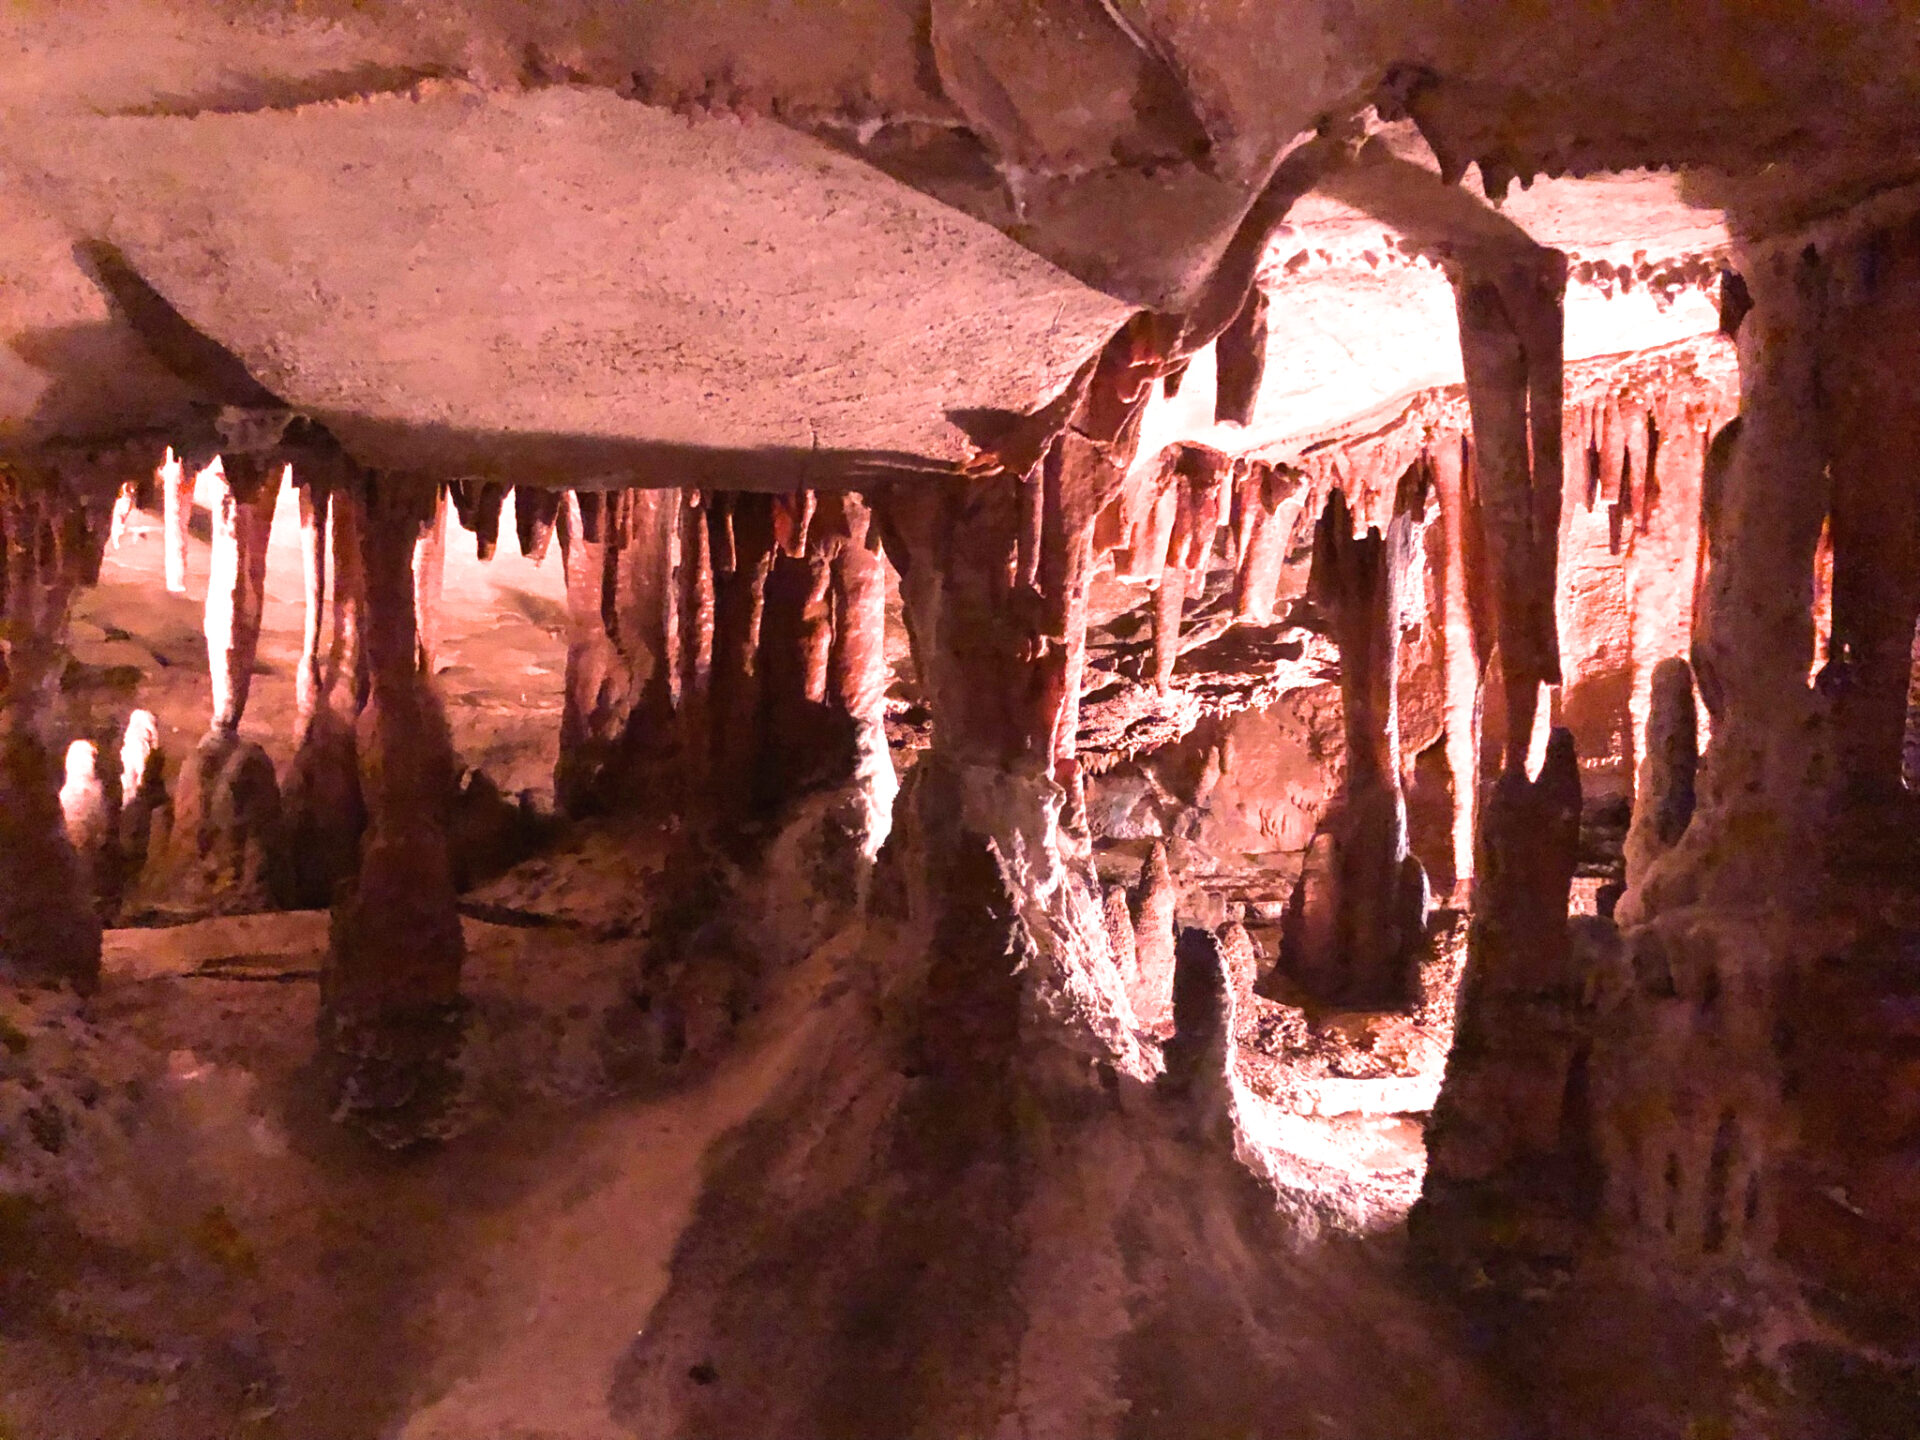 Visiting the Endless Caverns in Virginia & the Utter Darkness